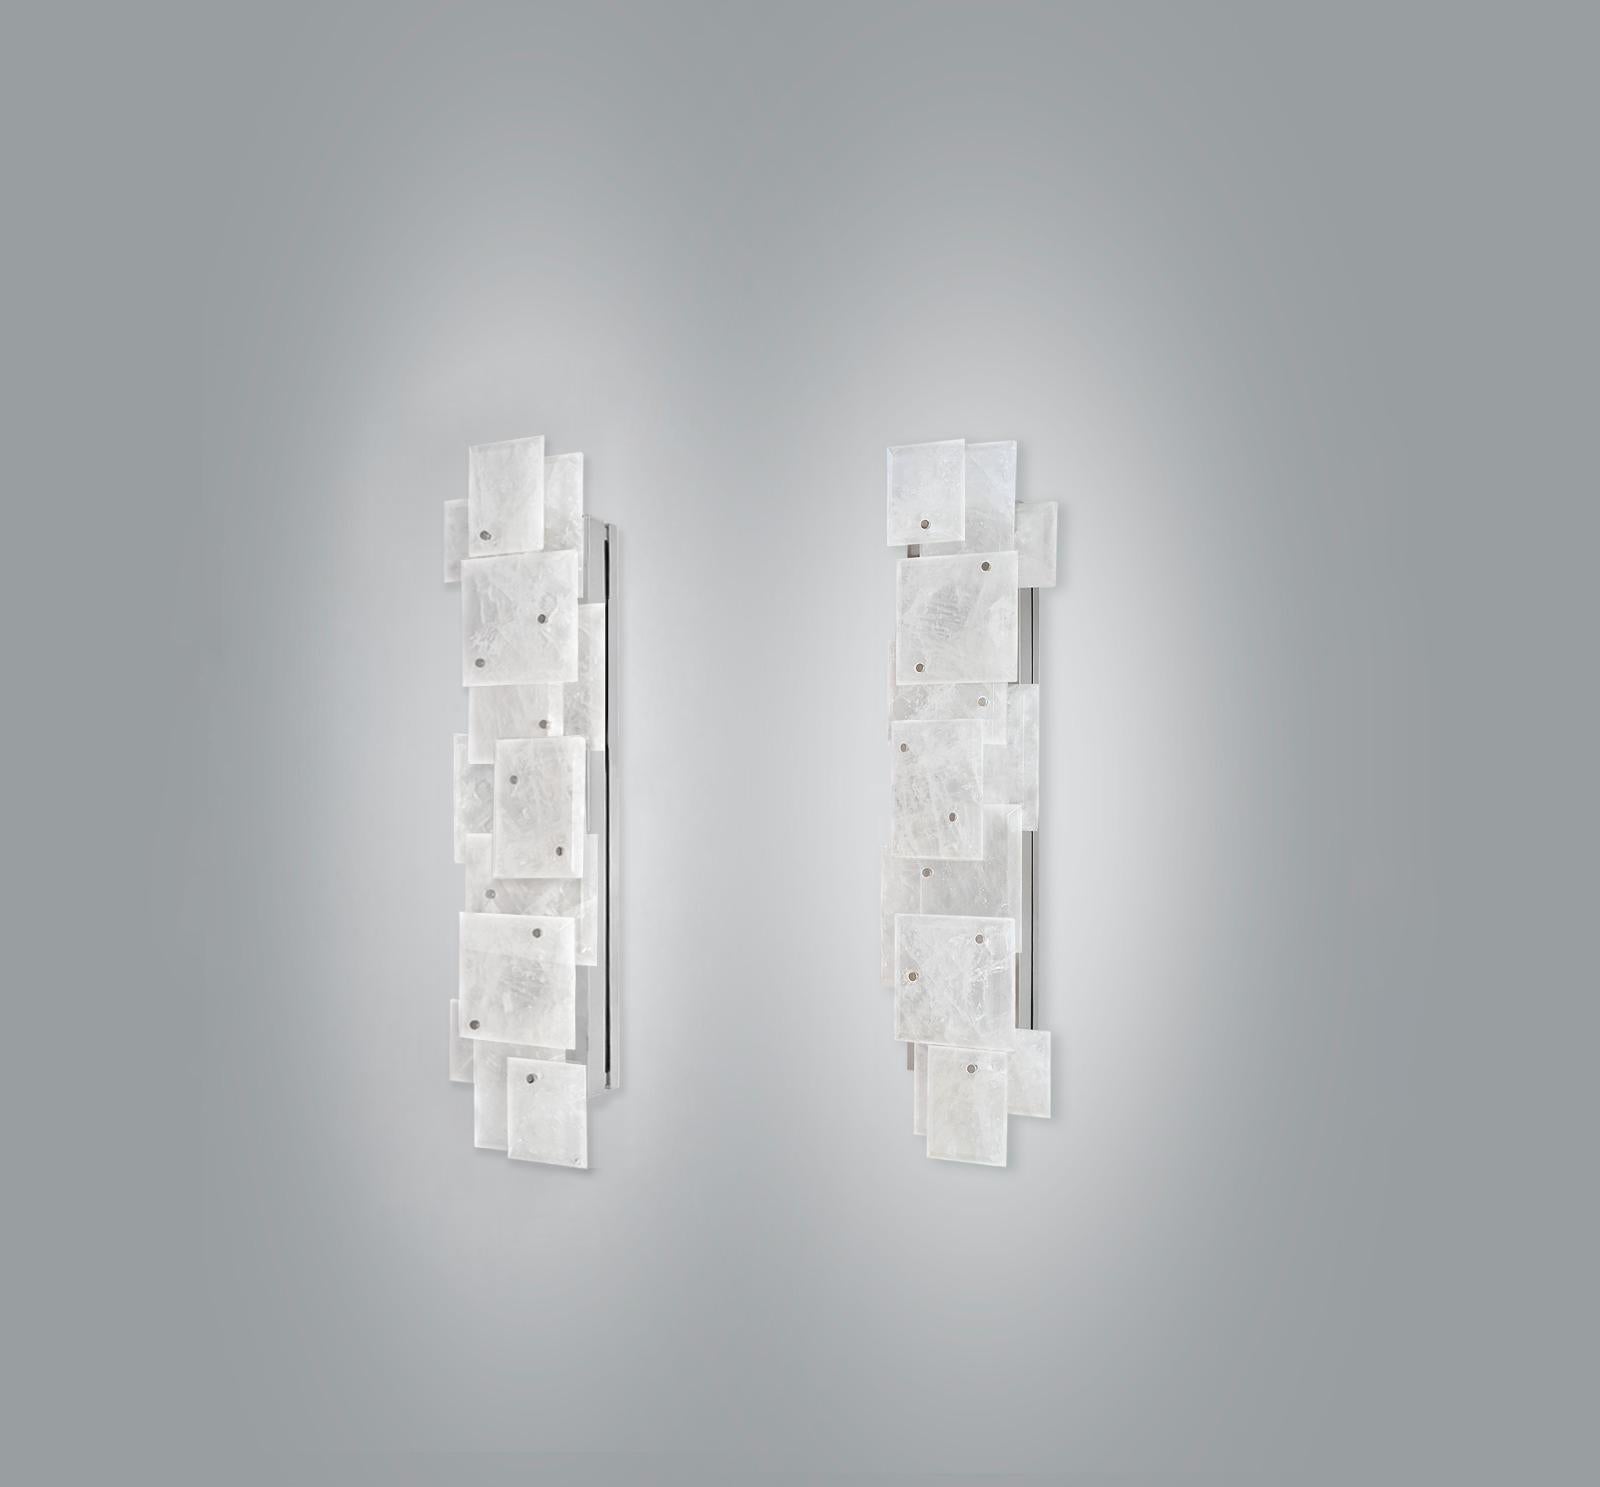 Pair of modern rock crystal quartz sconces with multiple panels decorations in nickel plating finish. Created by Phoenix Gallery.
Each sconce installed four sockets, use four 75 watts Led warm light bulbs, 300watts total. Light bulbs supplied.
 